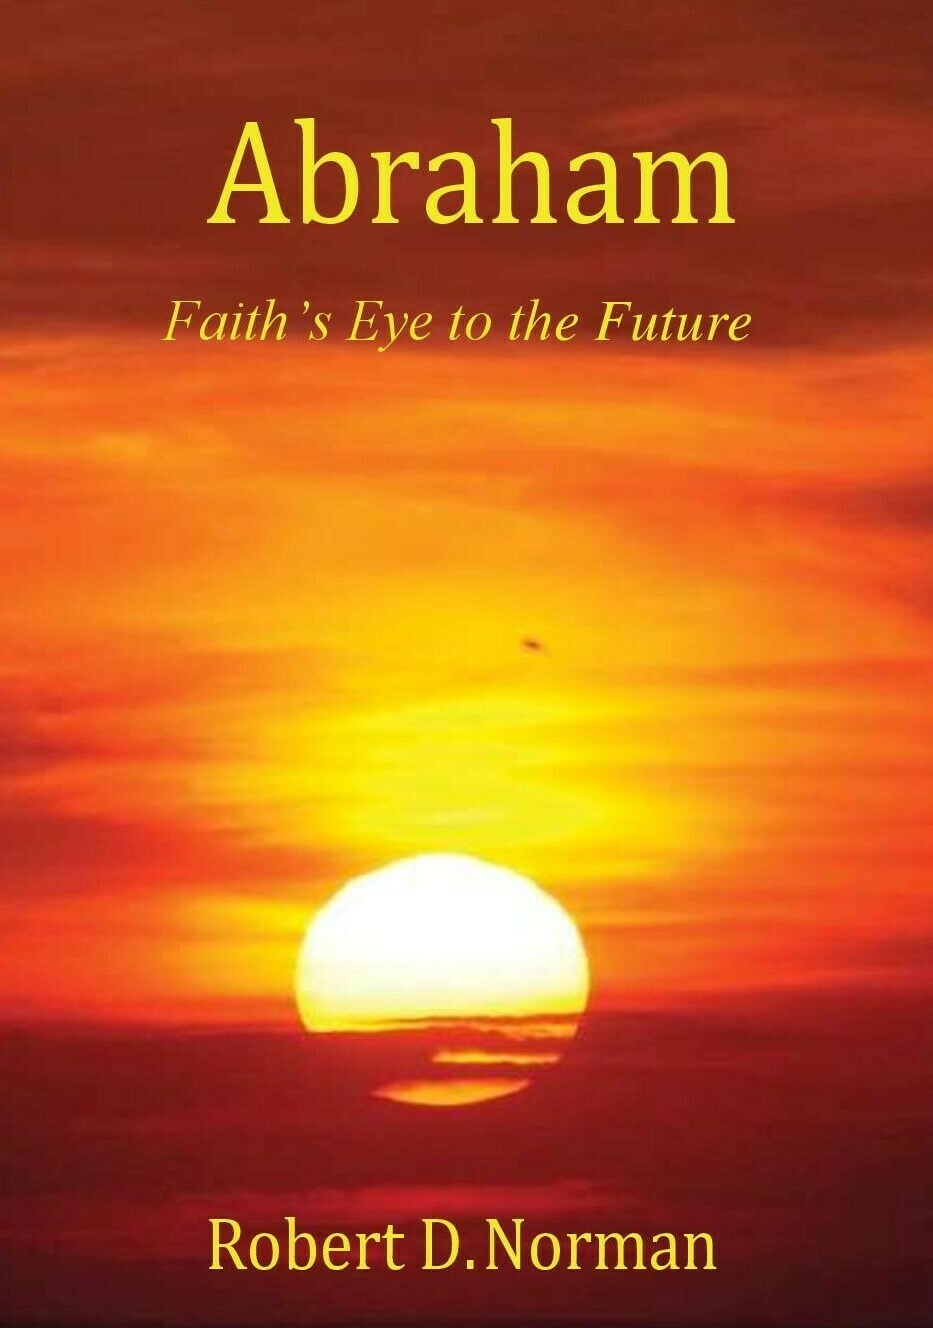 Abraham: Faith's Eye to the Future by Robert D. Norman (Soft-Cover & E-Book)